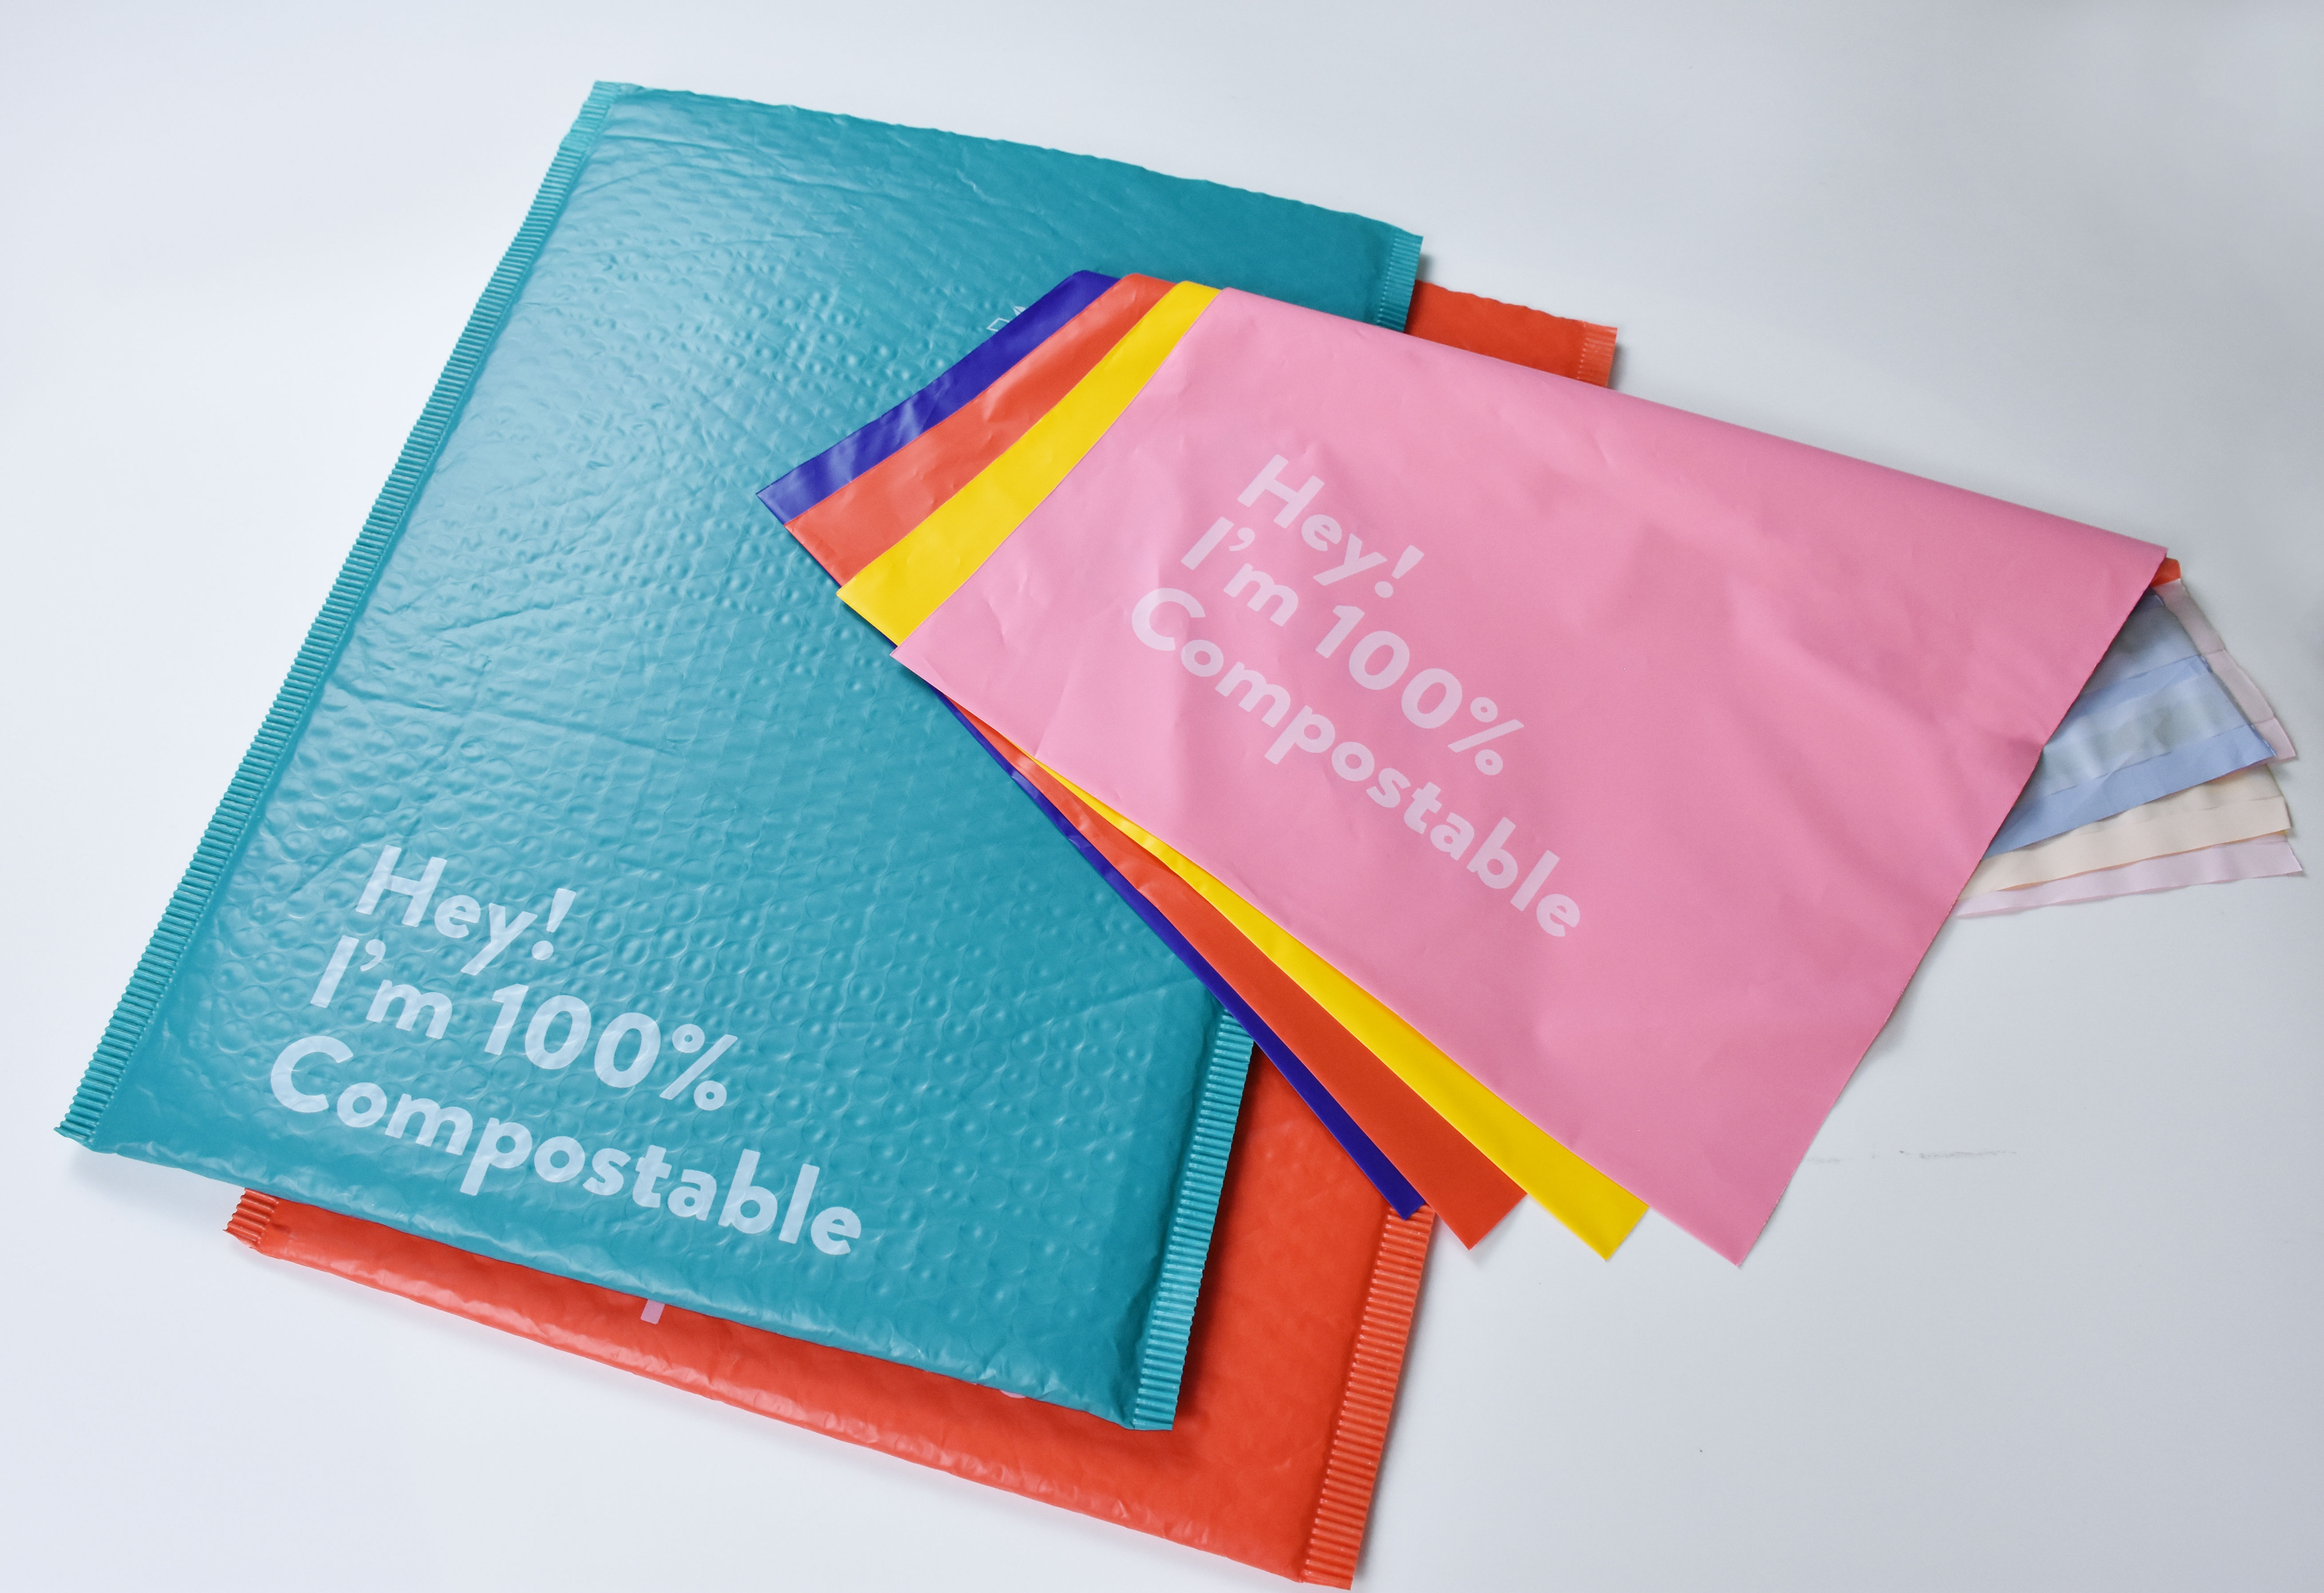 100% Home Compostable Self-adhesive Envelopes Put On The Shelf